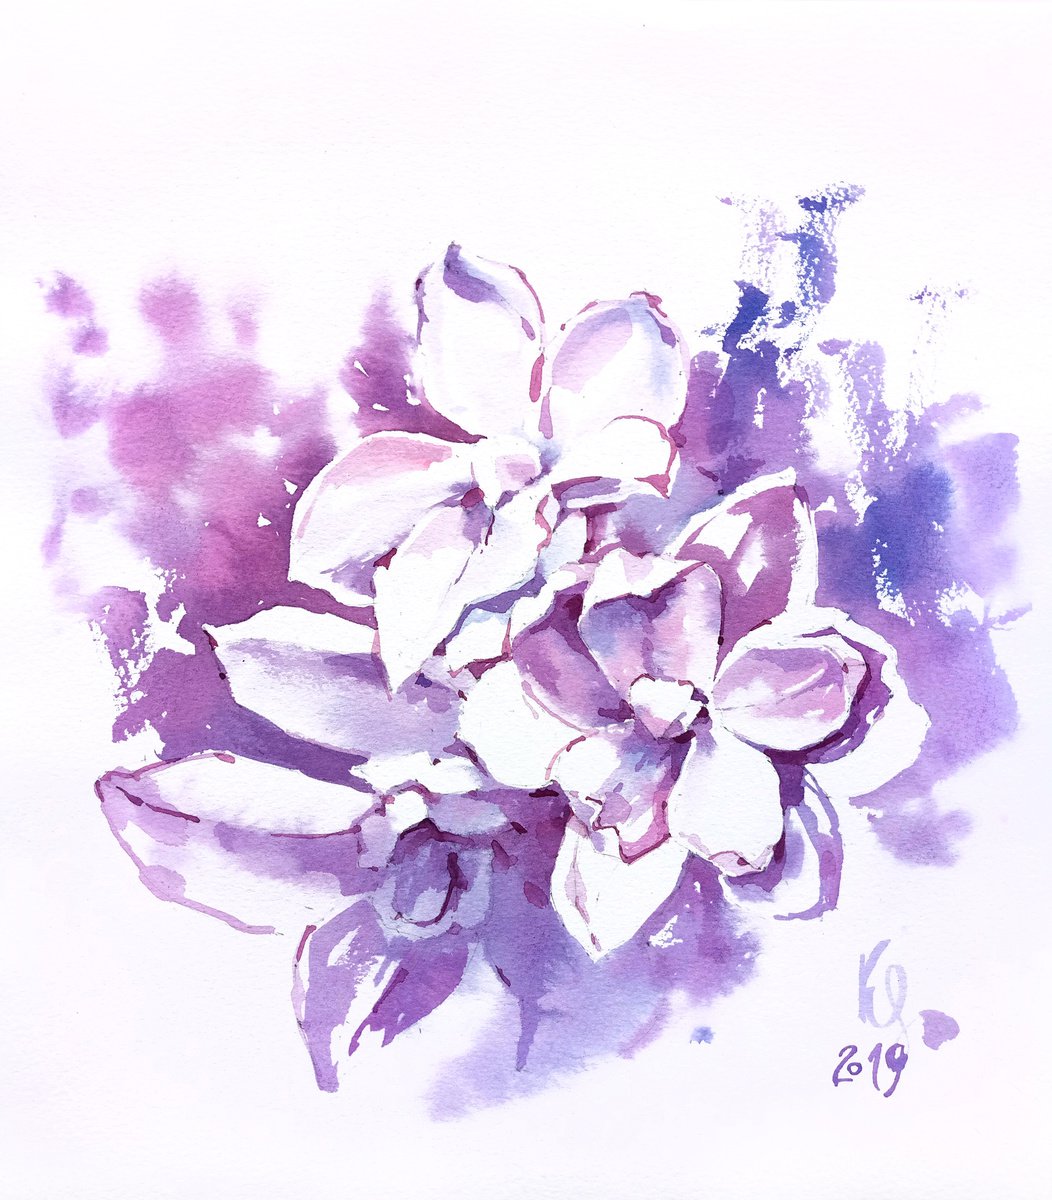 Original watercolor painting Thousand Shades of Lilac Flowers by Ksenia Selianko